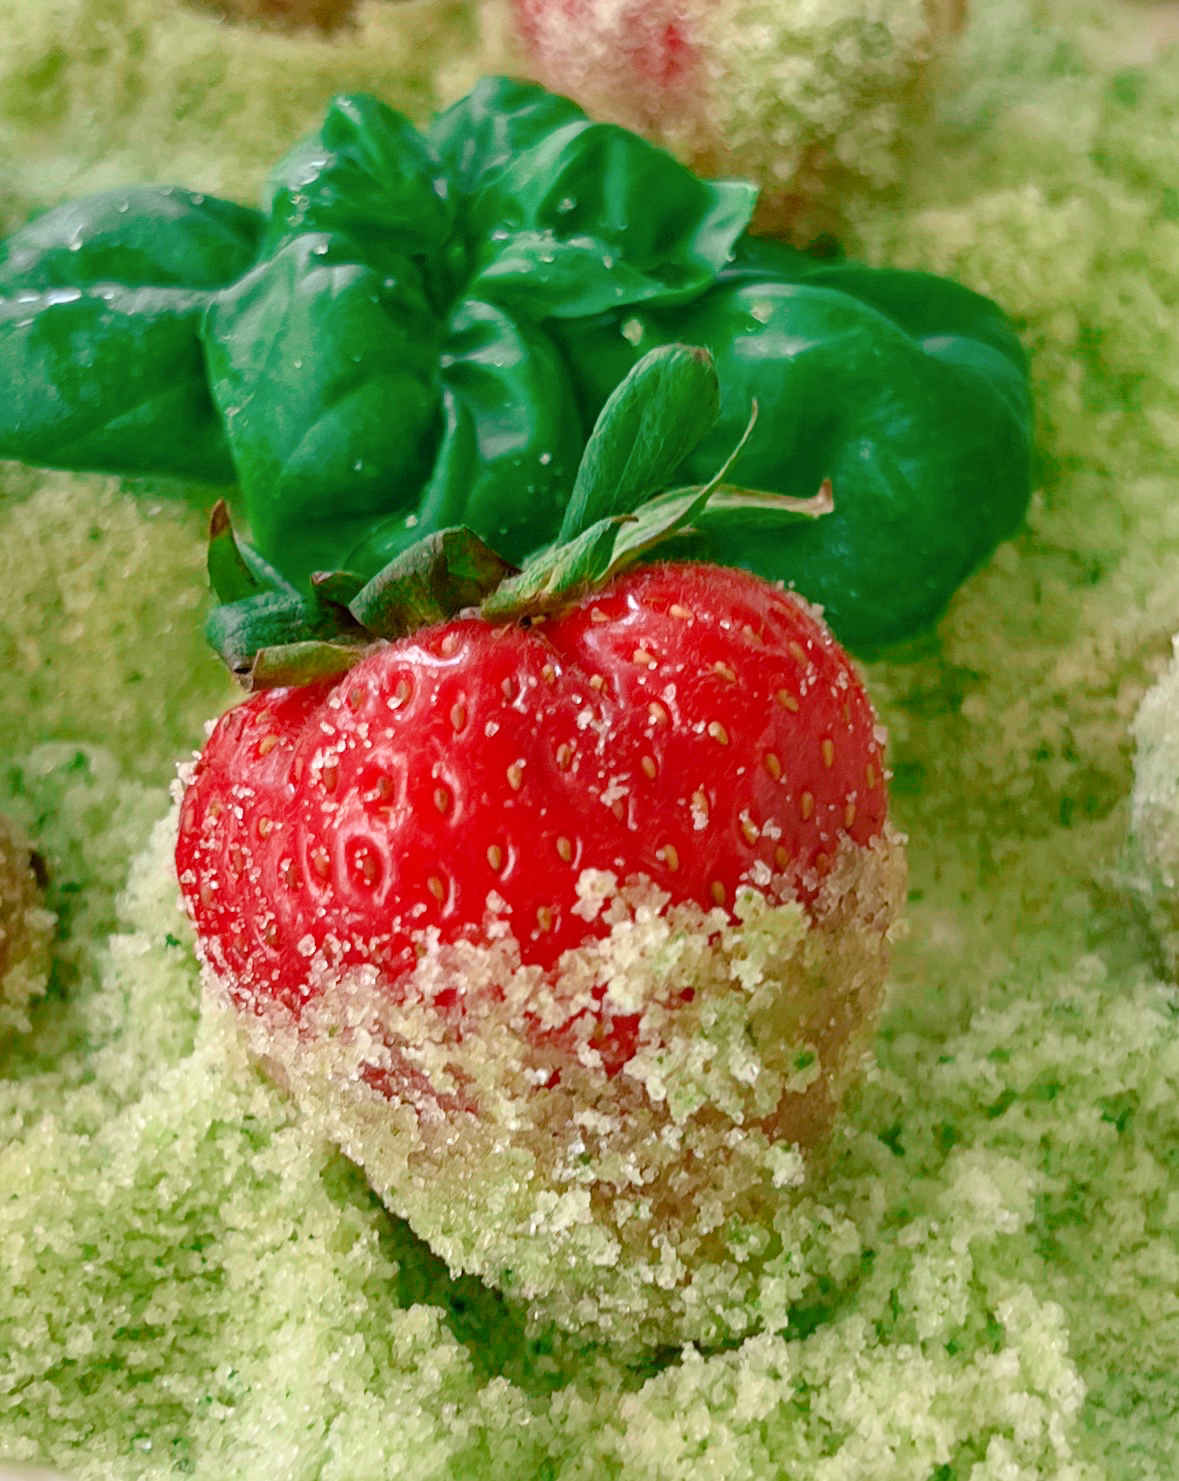 How To Make Sweet Basil Sugar with Strawberries